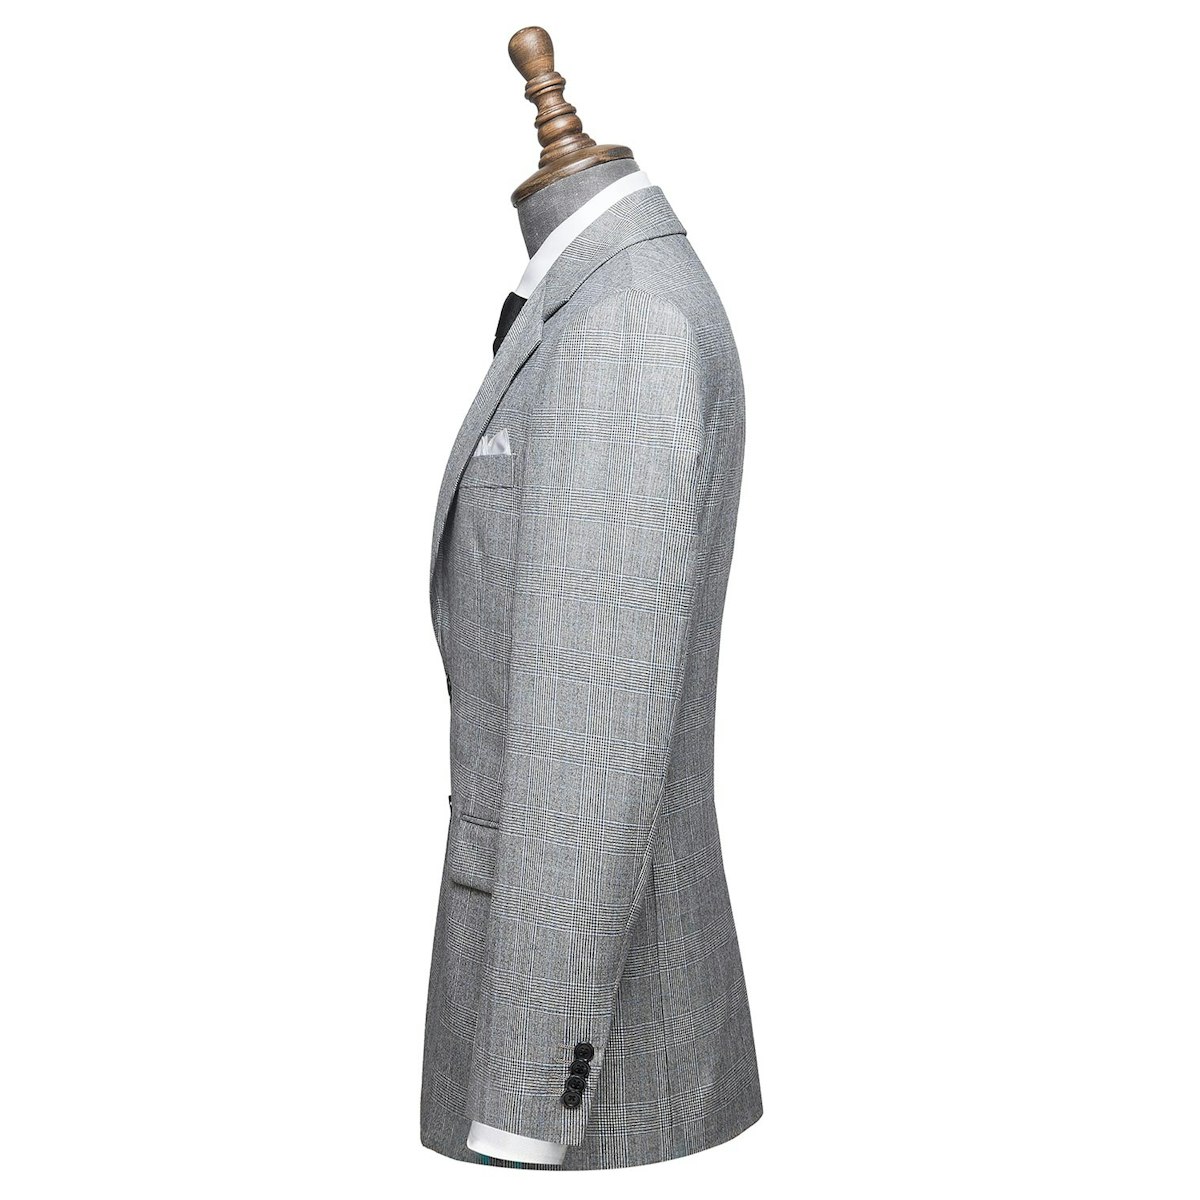 InStitchu Collection The Stafford mens suit